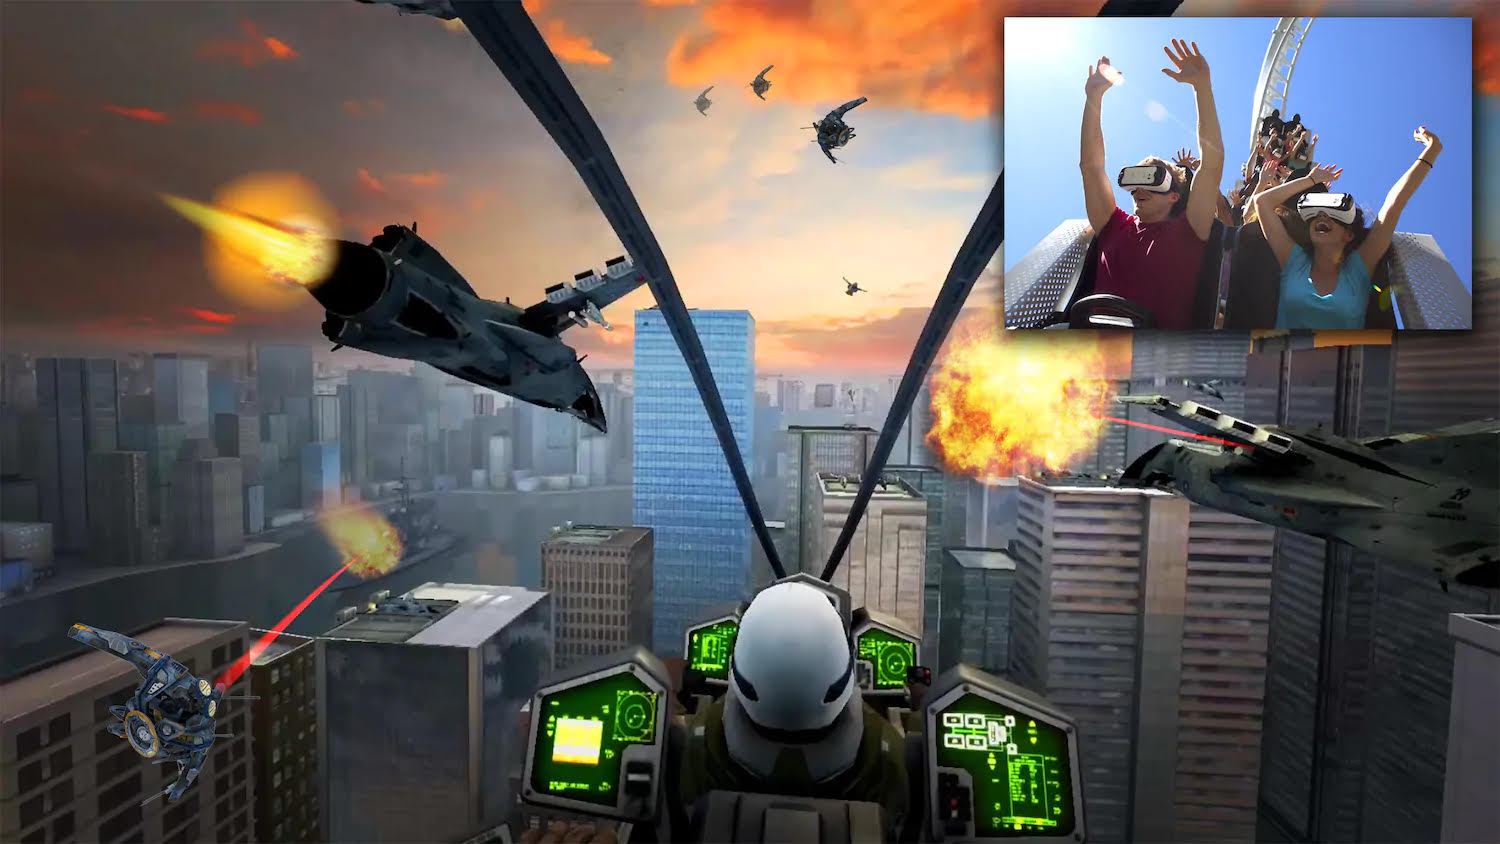 The virtual experience provided to riders on Six Flags' new VR roller coasters.